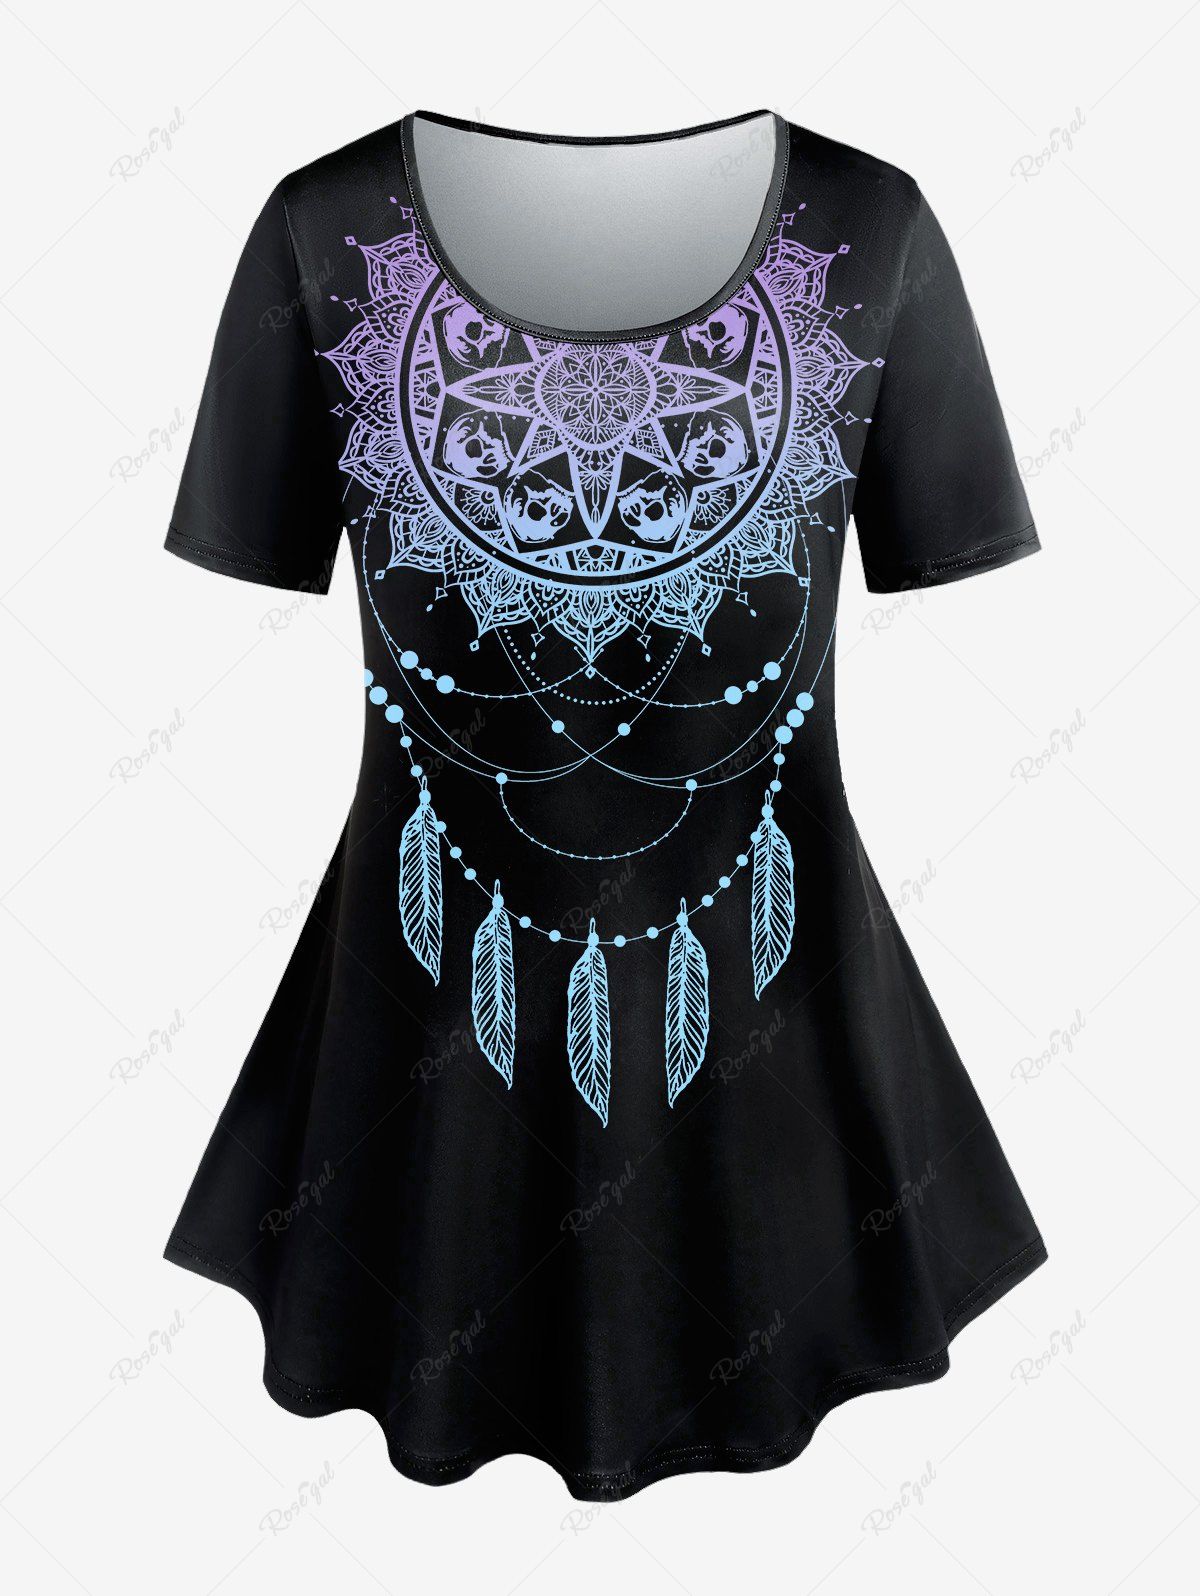 Outfit Plus Size Casual Dreamcatcher Print Tee  